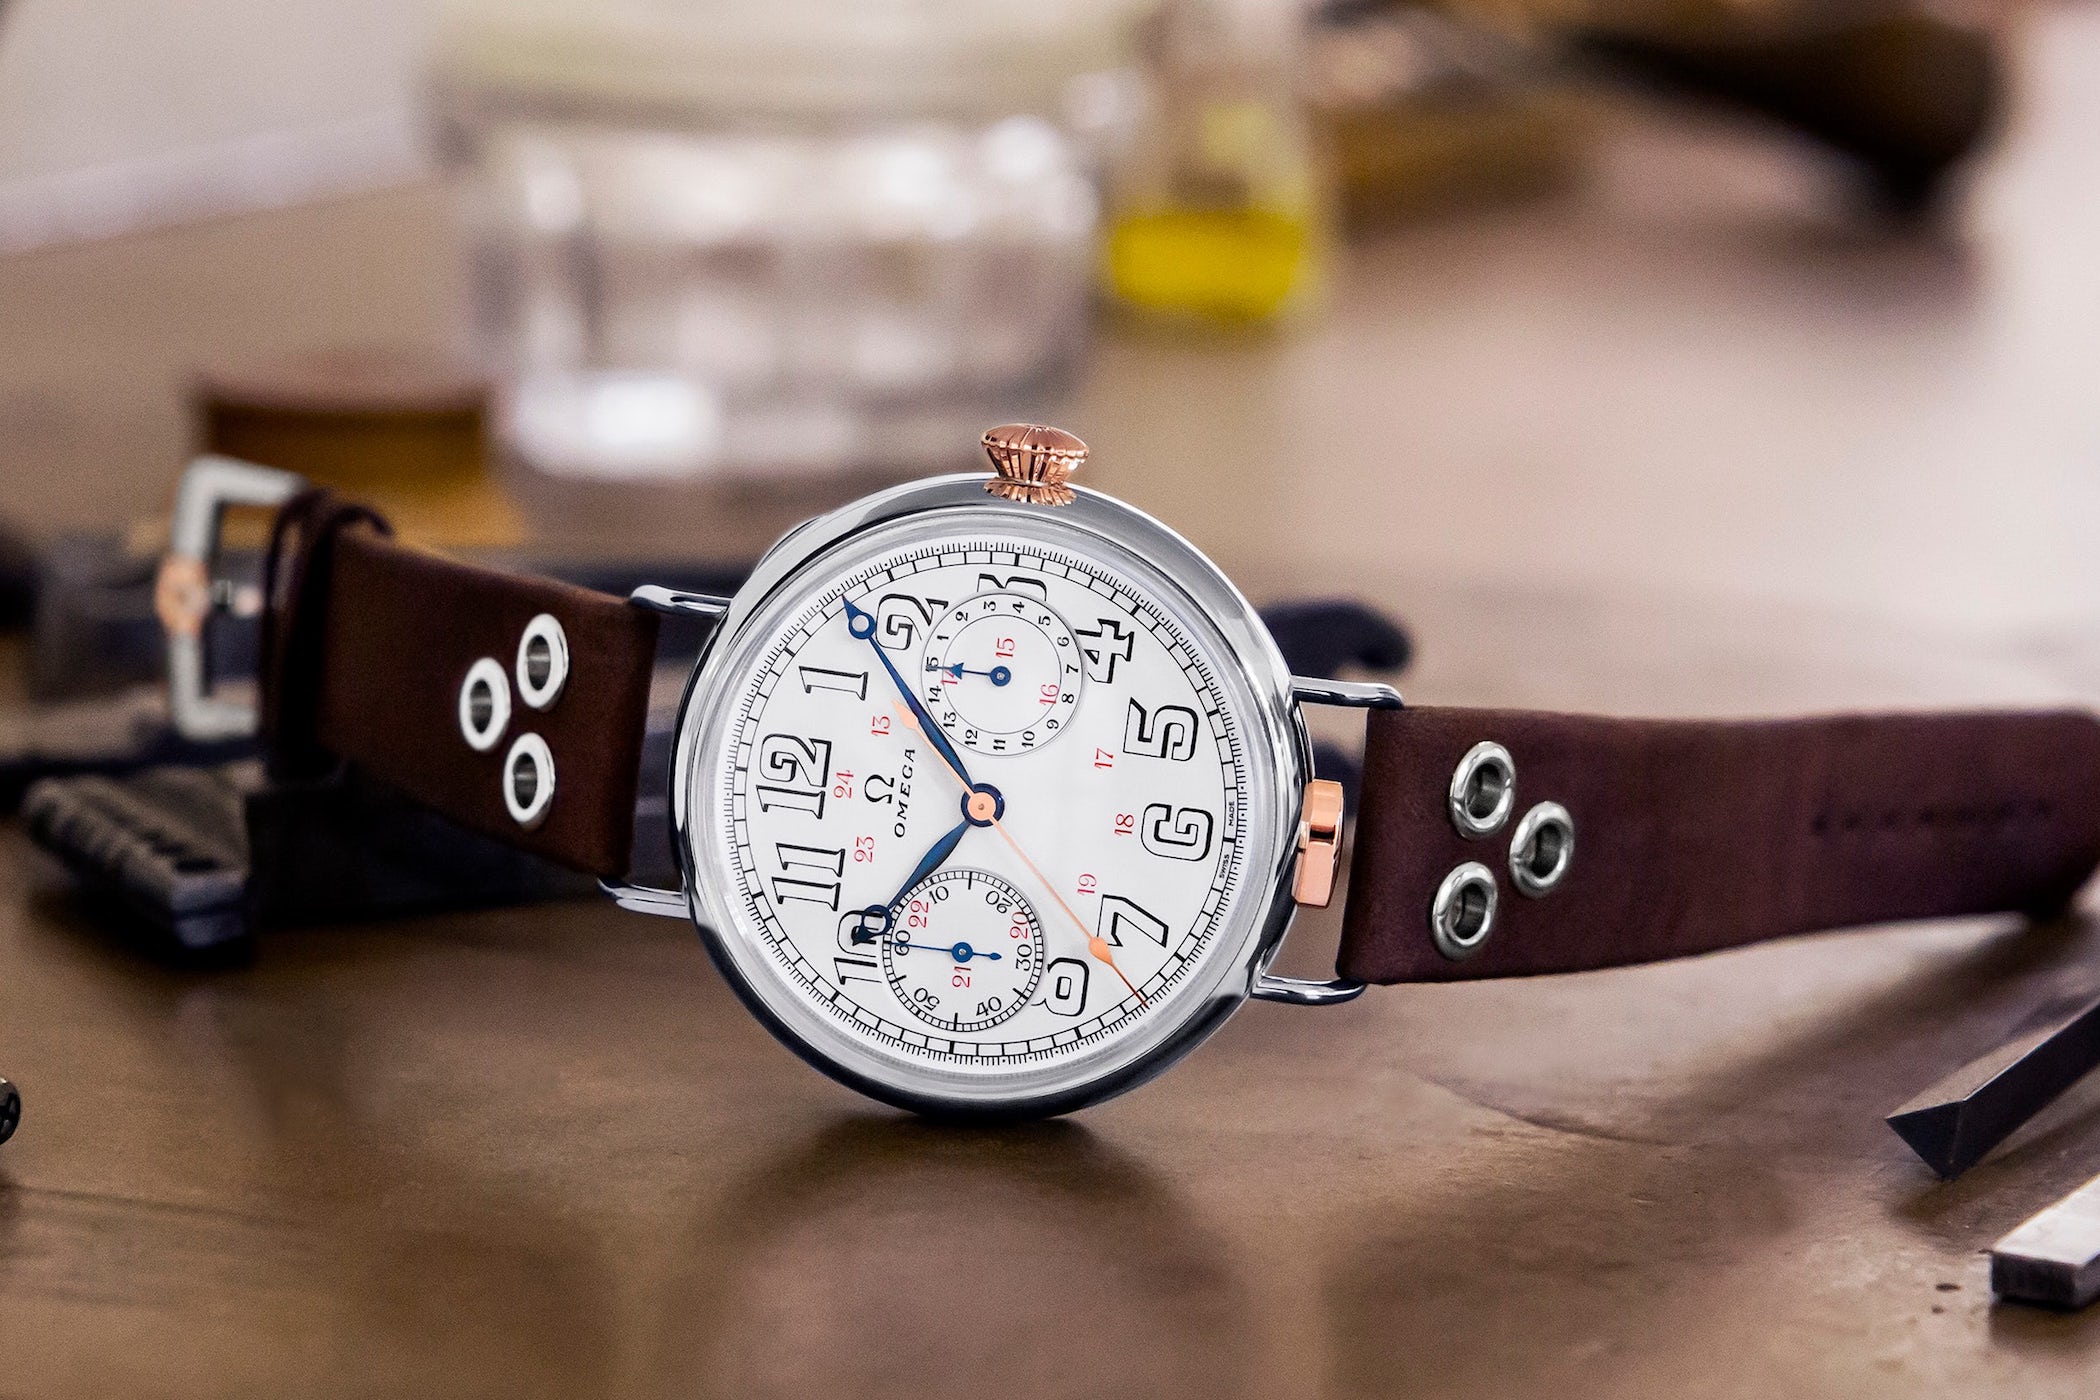 Omega Reissued their first attempt at making a chronograph